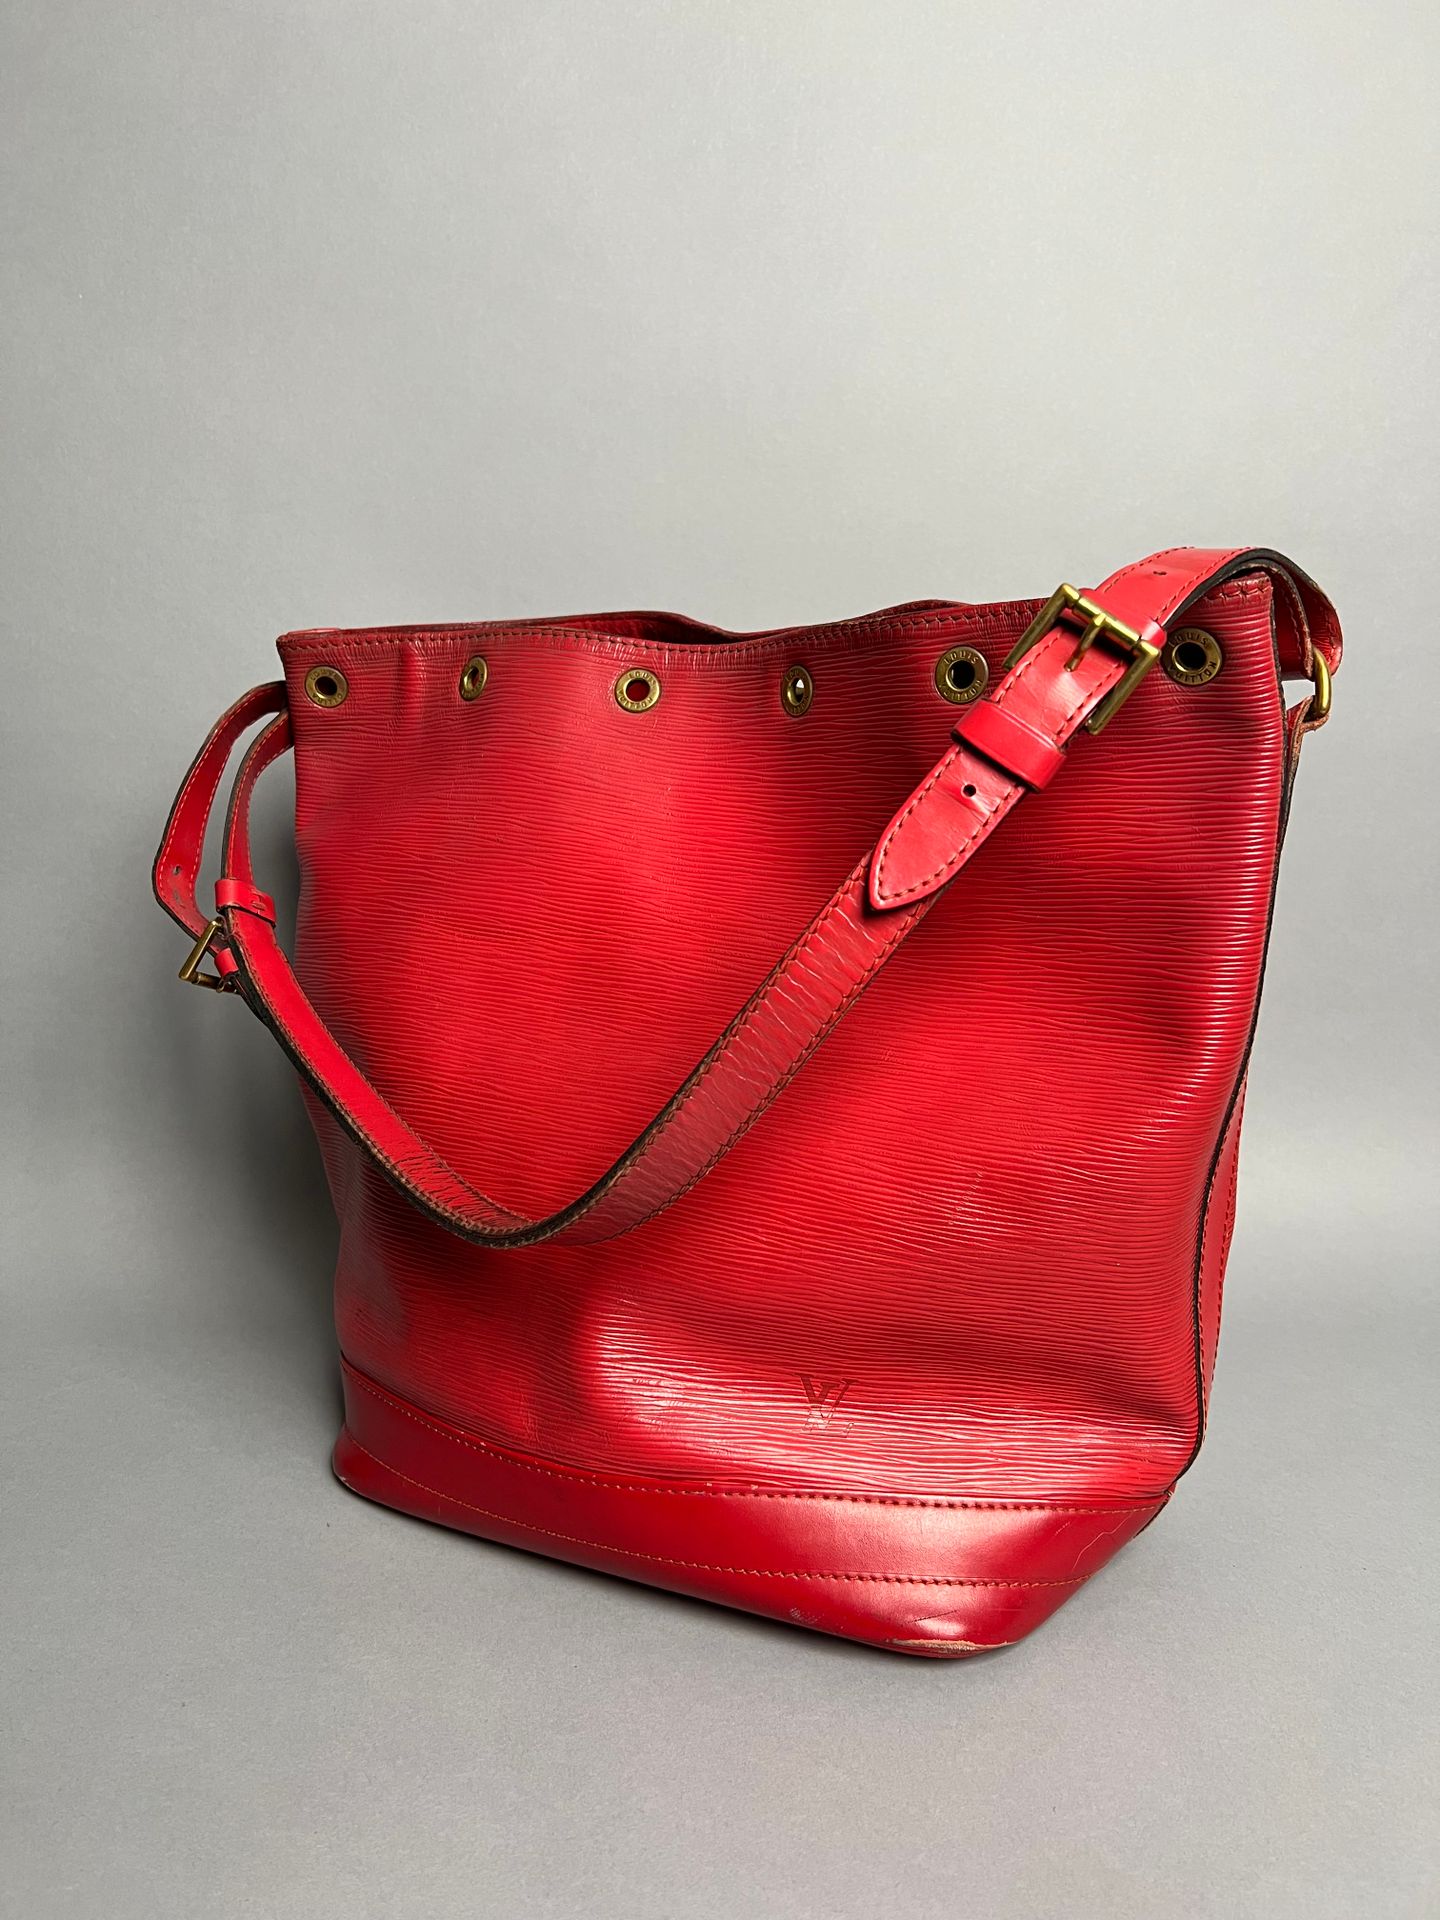 louis vuitton bag red and black